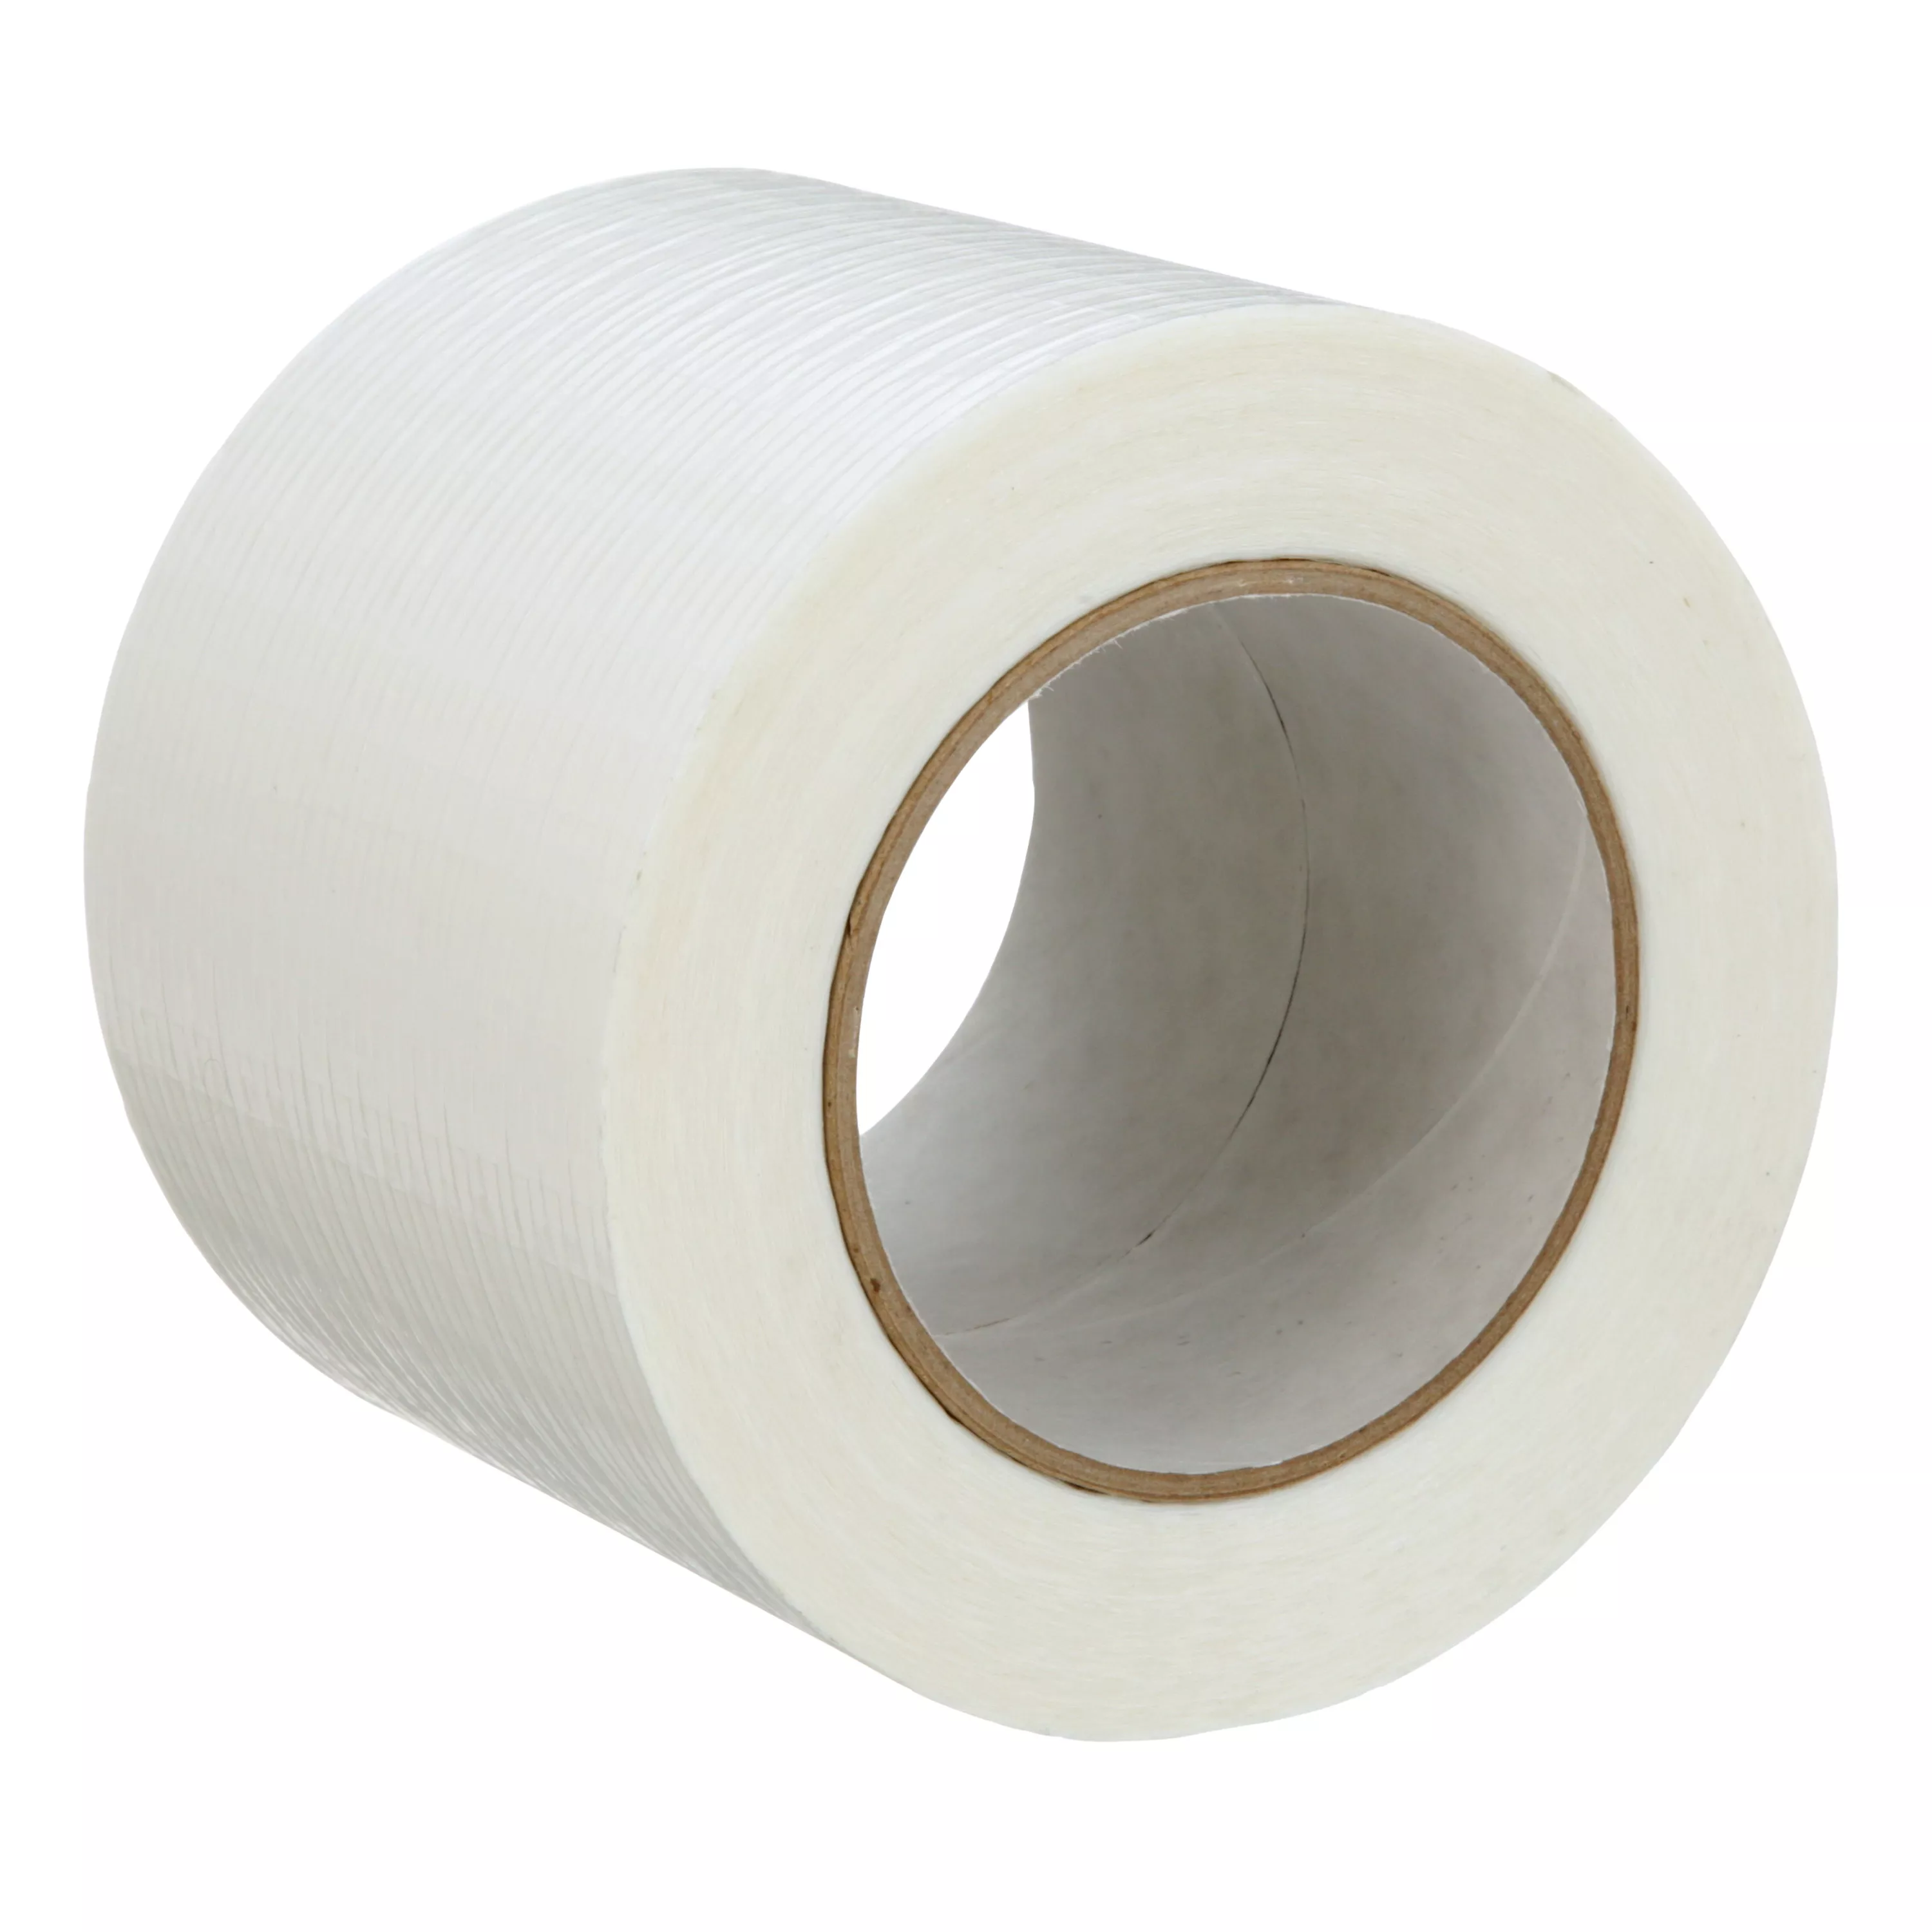 3M™ Woven Patch Tape 442W, White, 99 mm x 50 m, 15 Rolls/Case